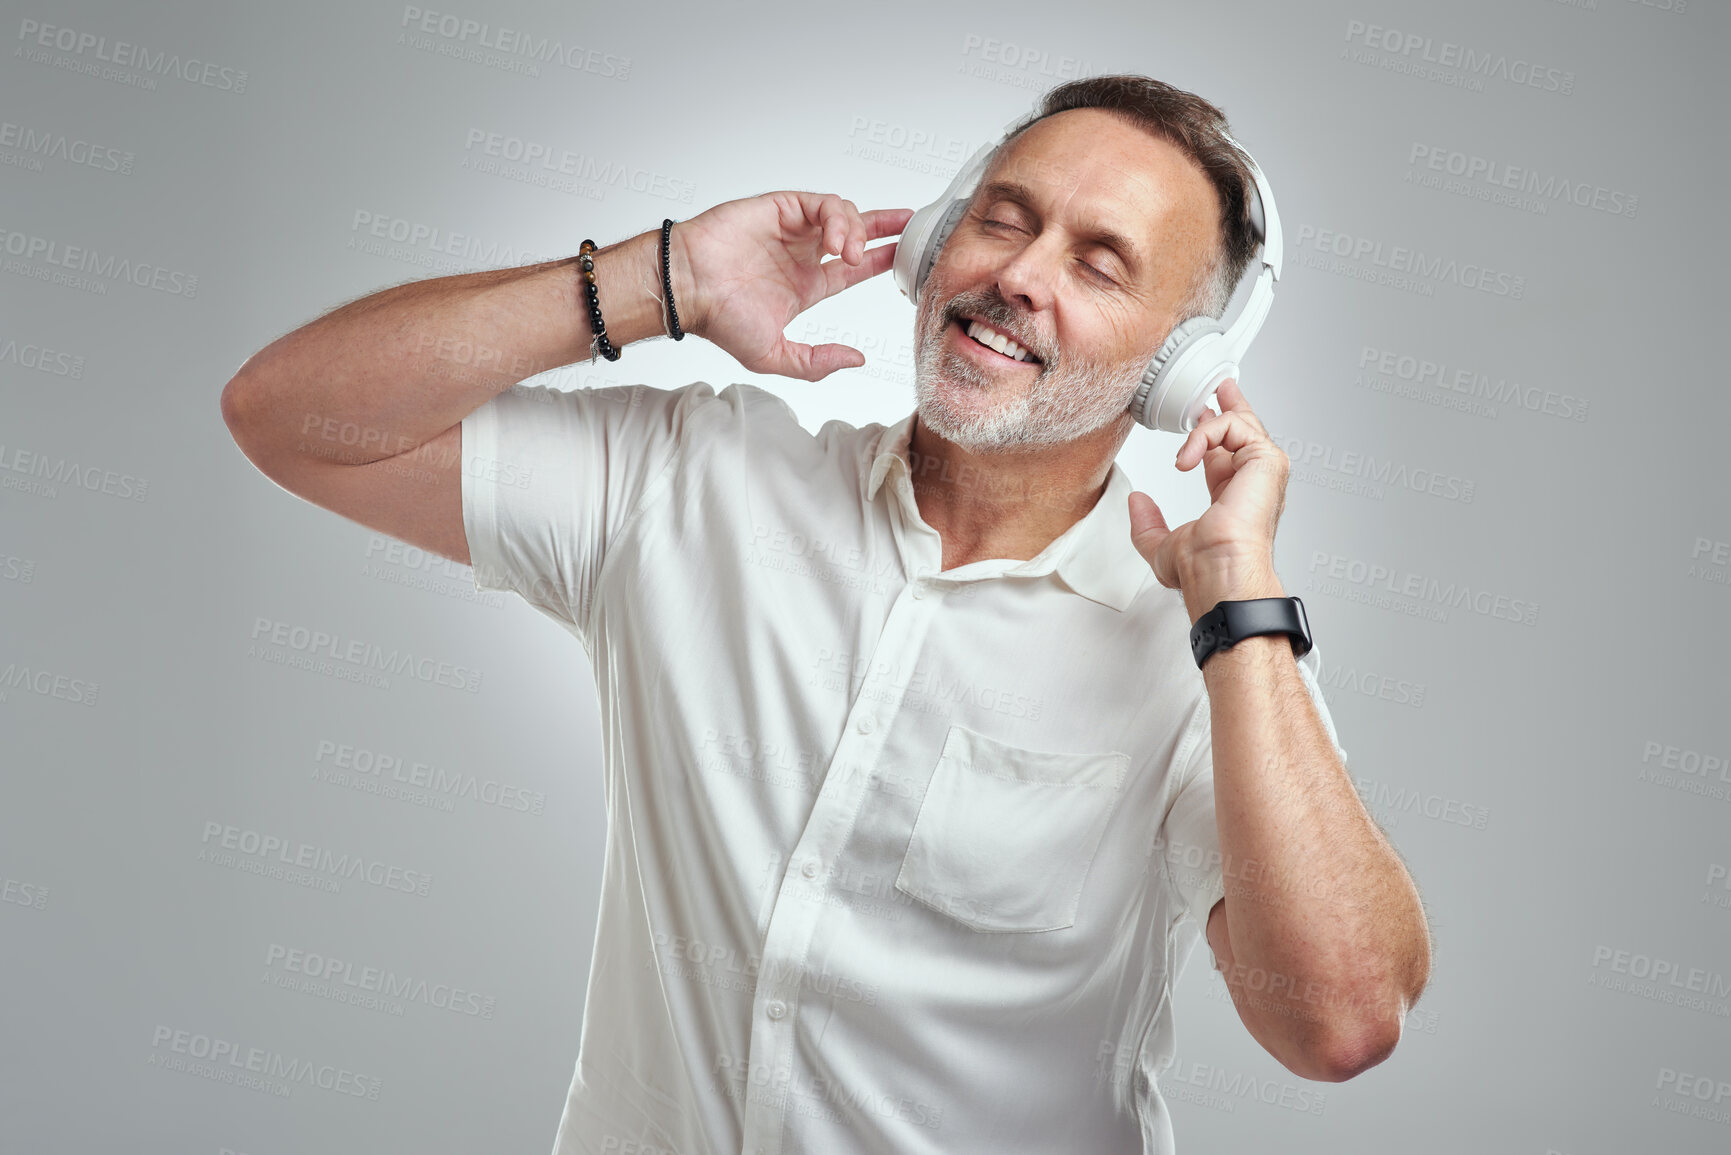 Buy stock photo Studio shot of a mature man wearing headphones against a grey background